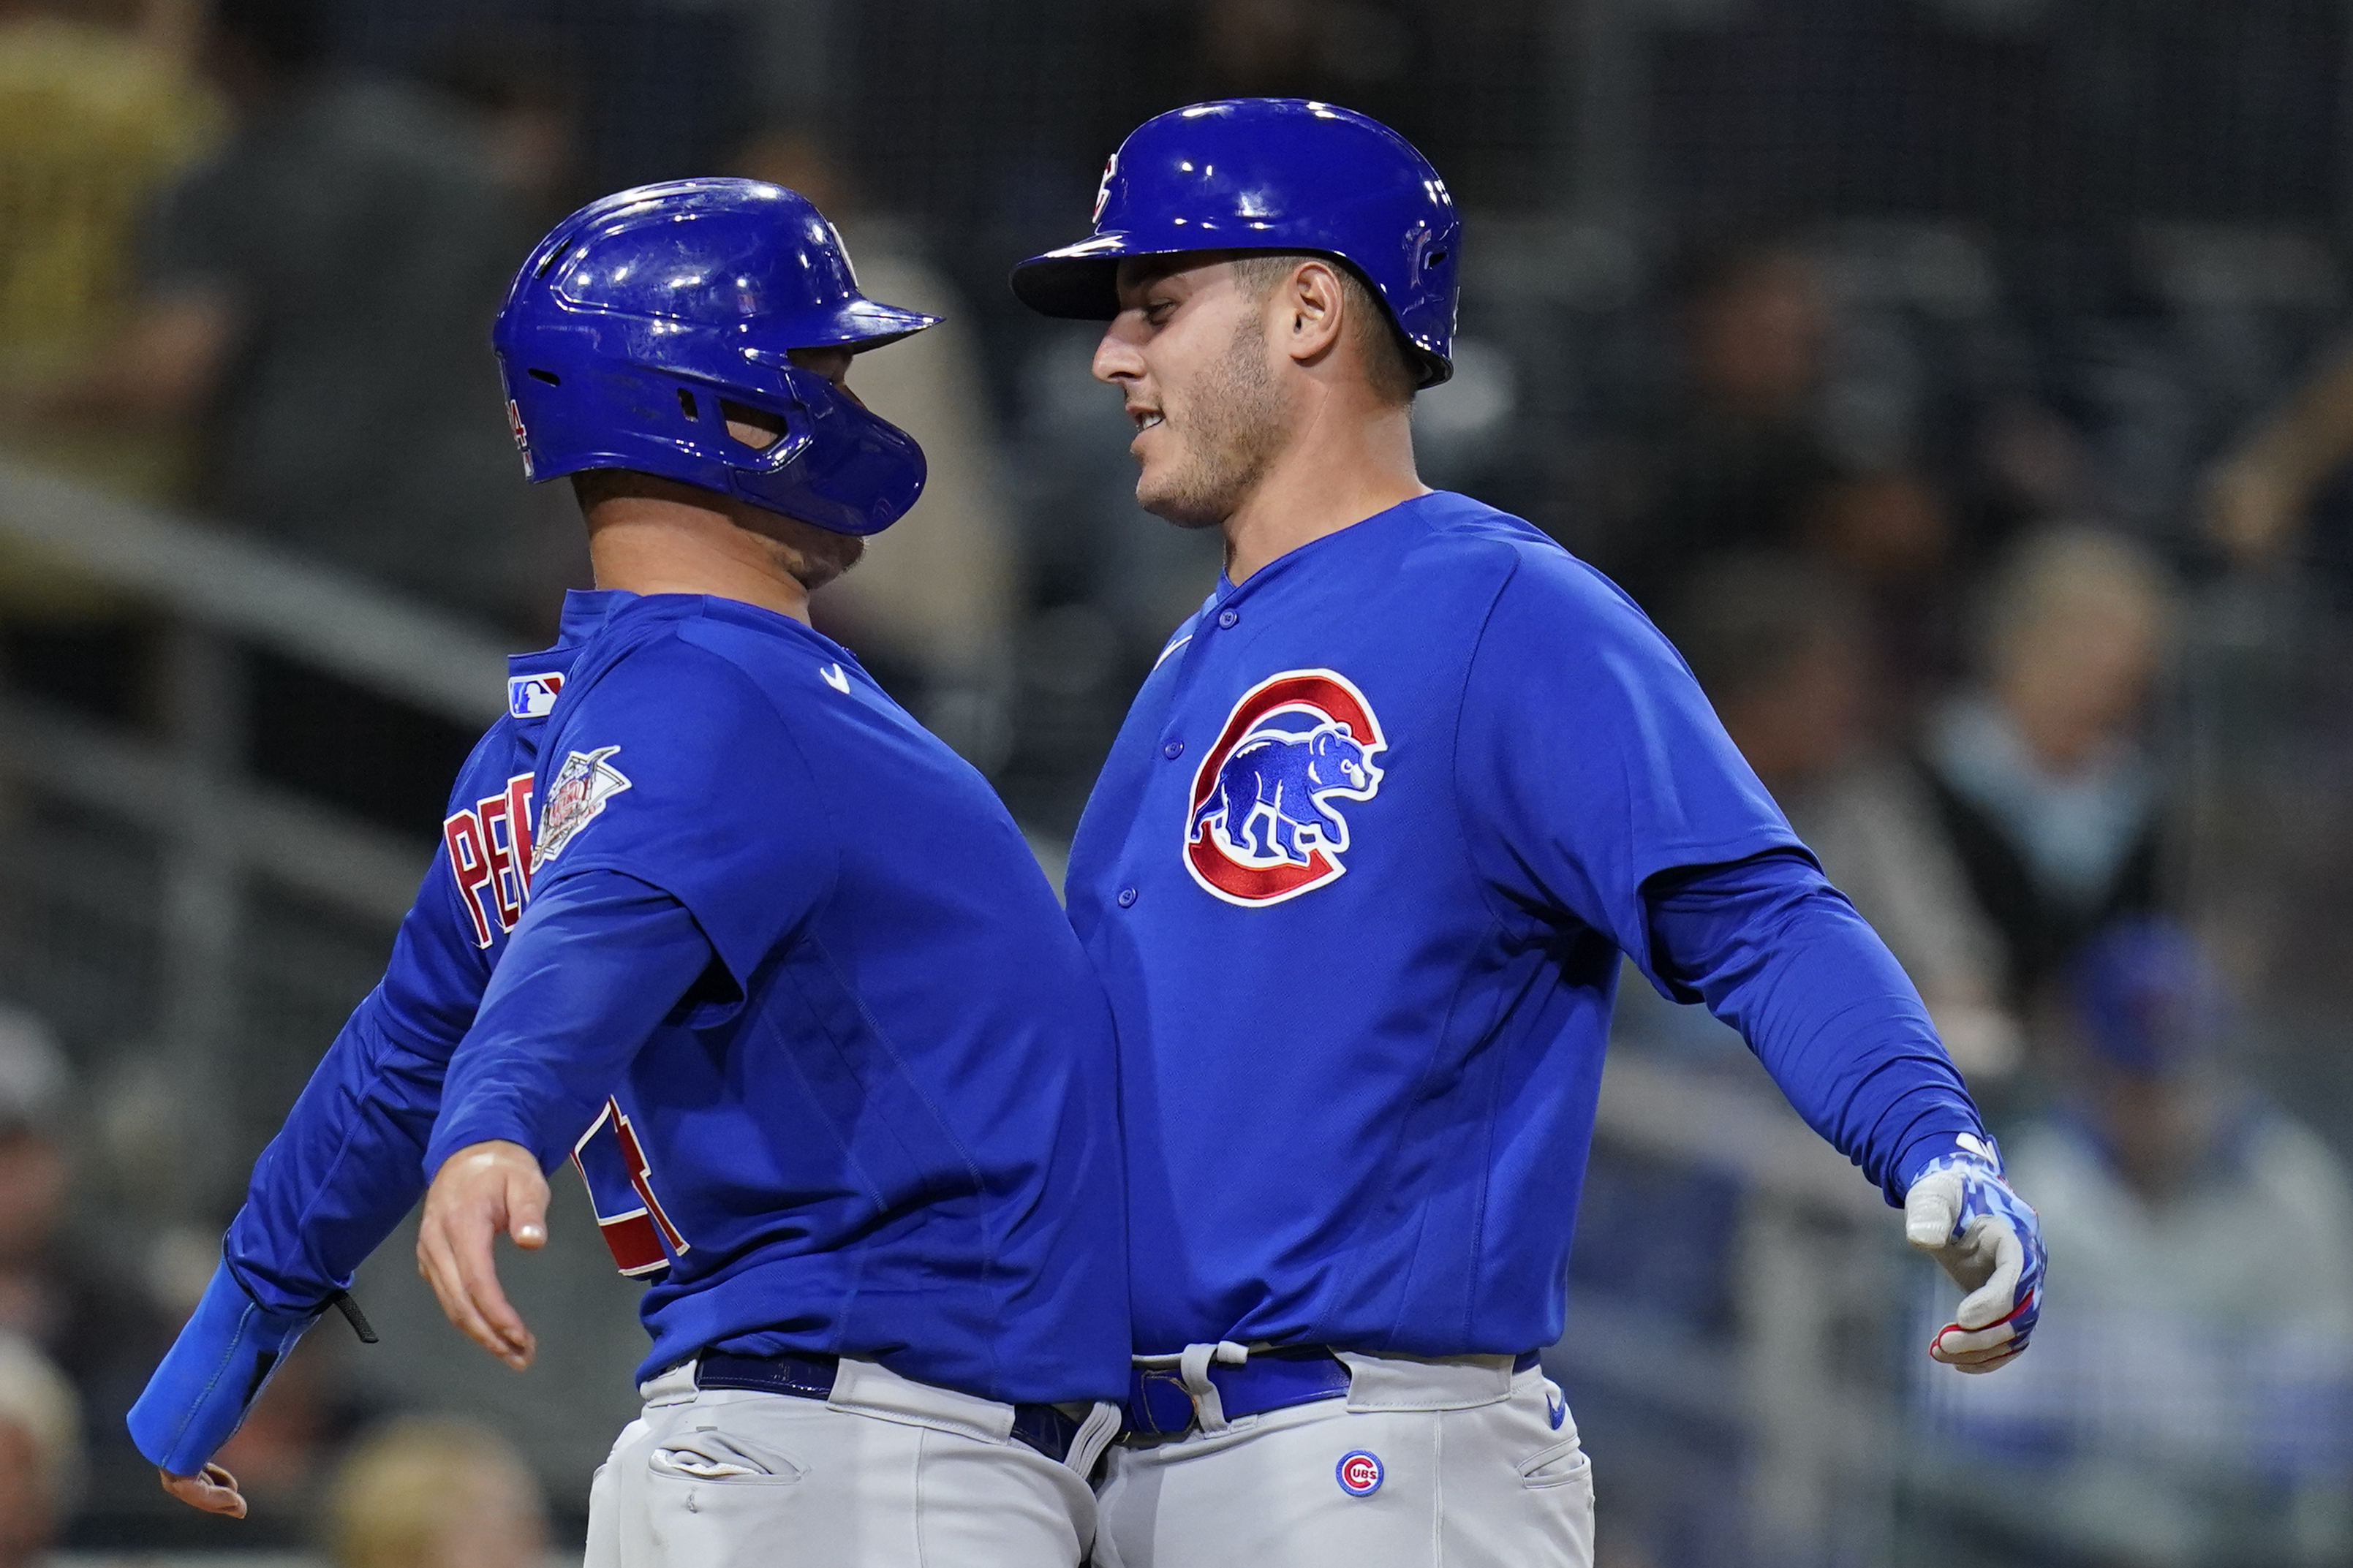 Davies strong, Rizzo, Wisdom homer in Cubs' 7-1 win vs Pads